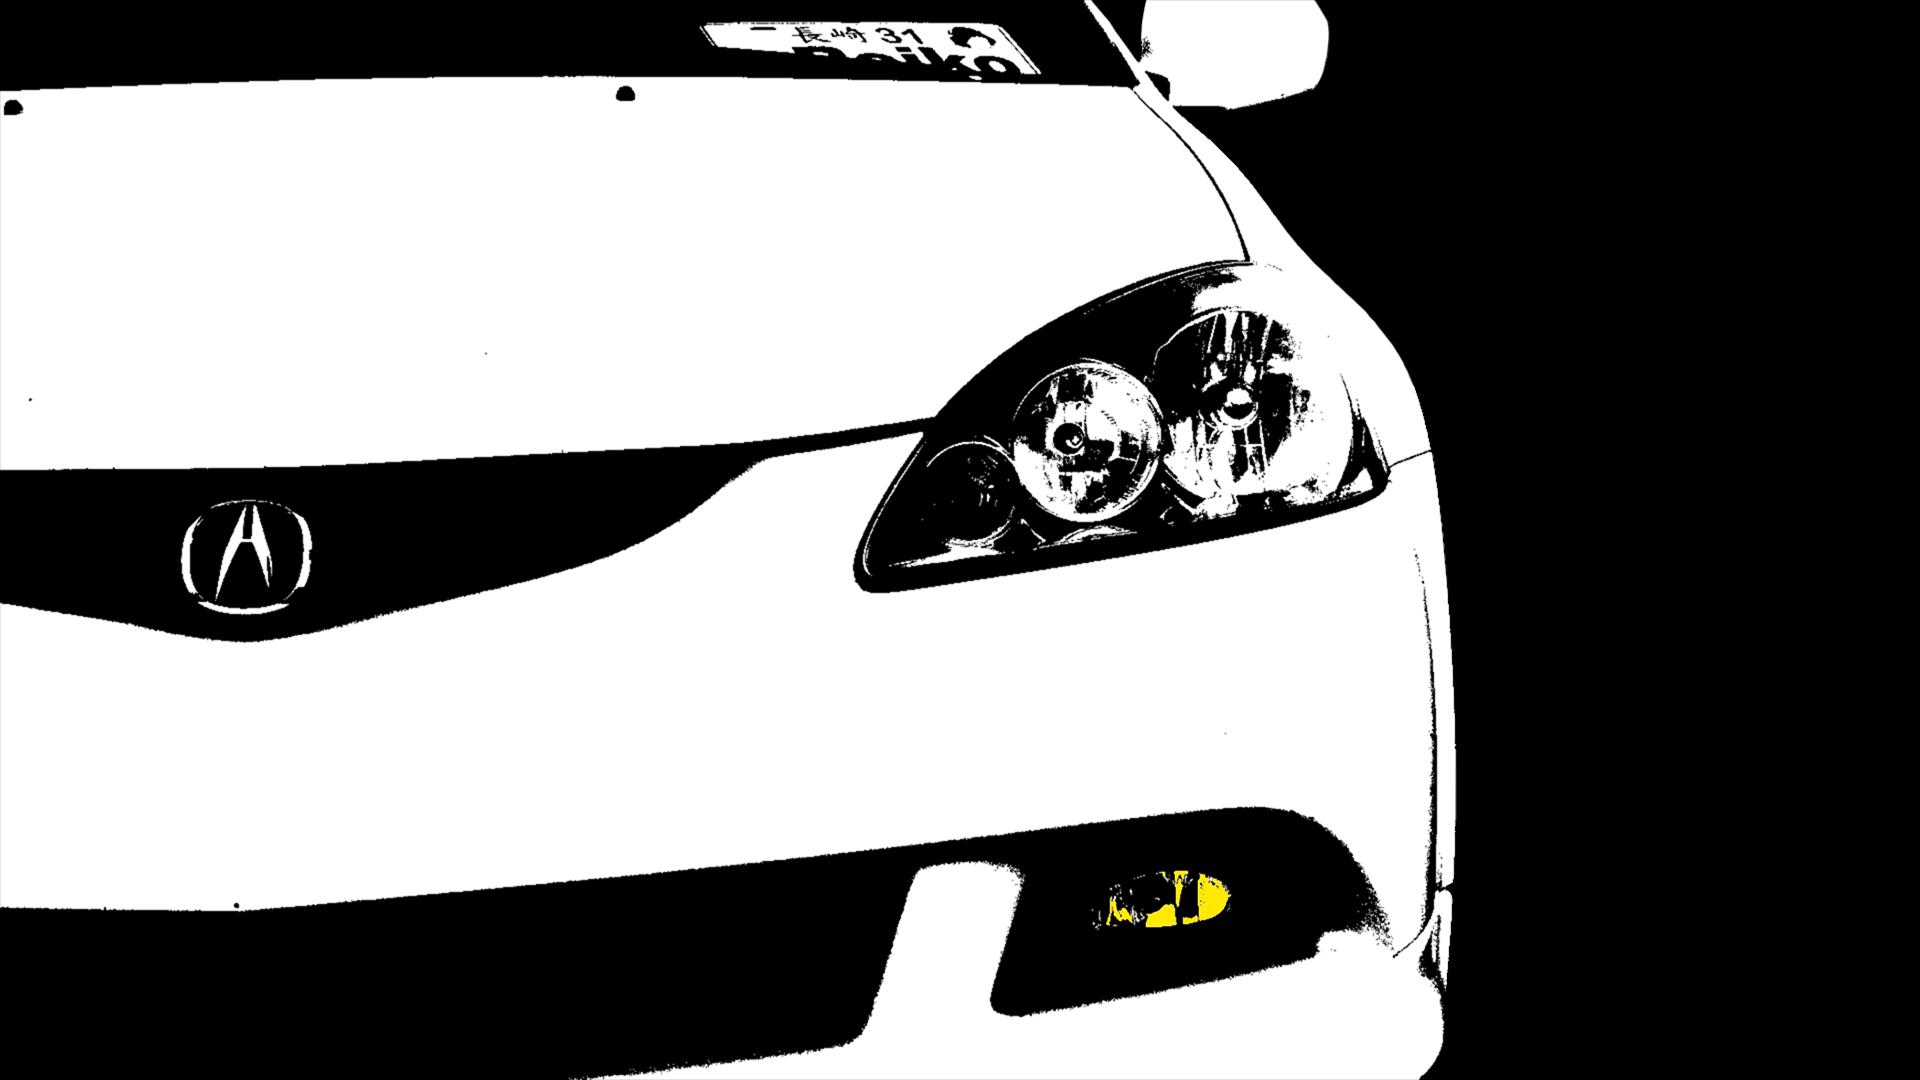 I Made A Simplistic Background Of My Rsx Acura